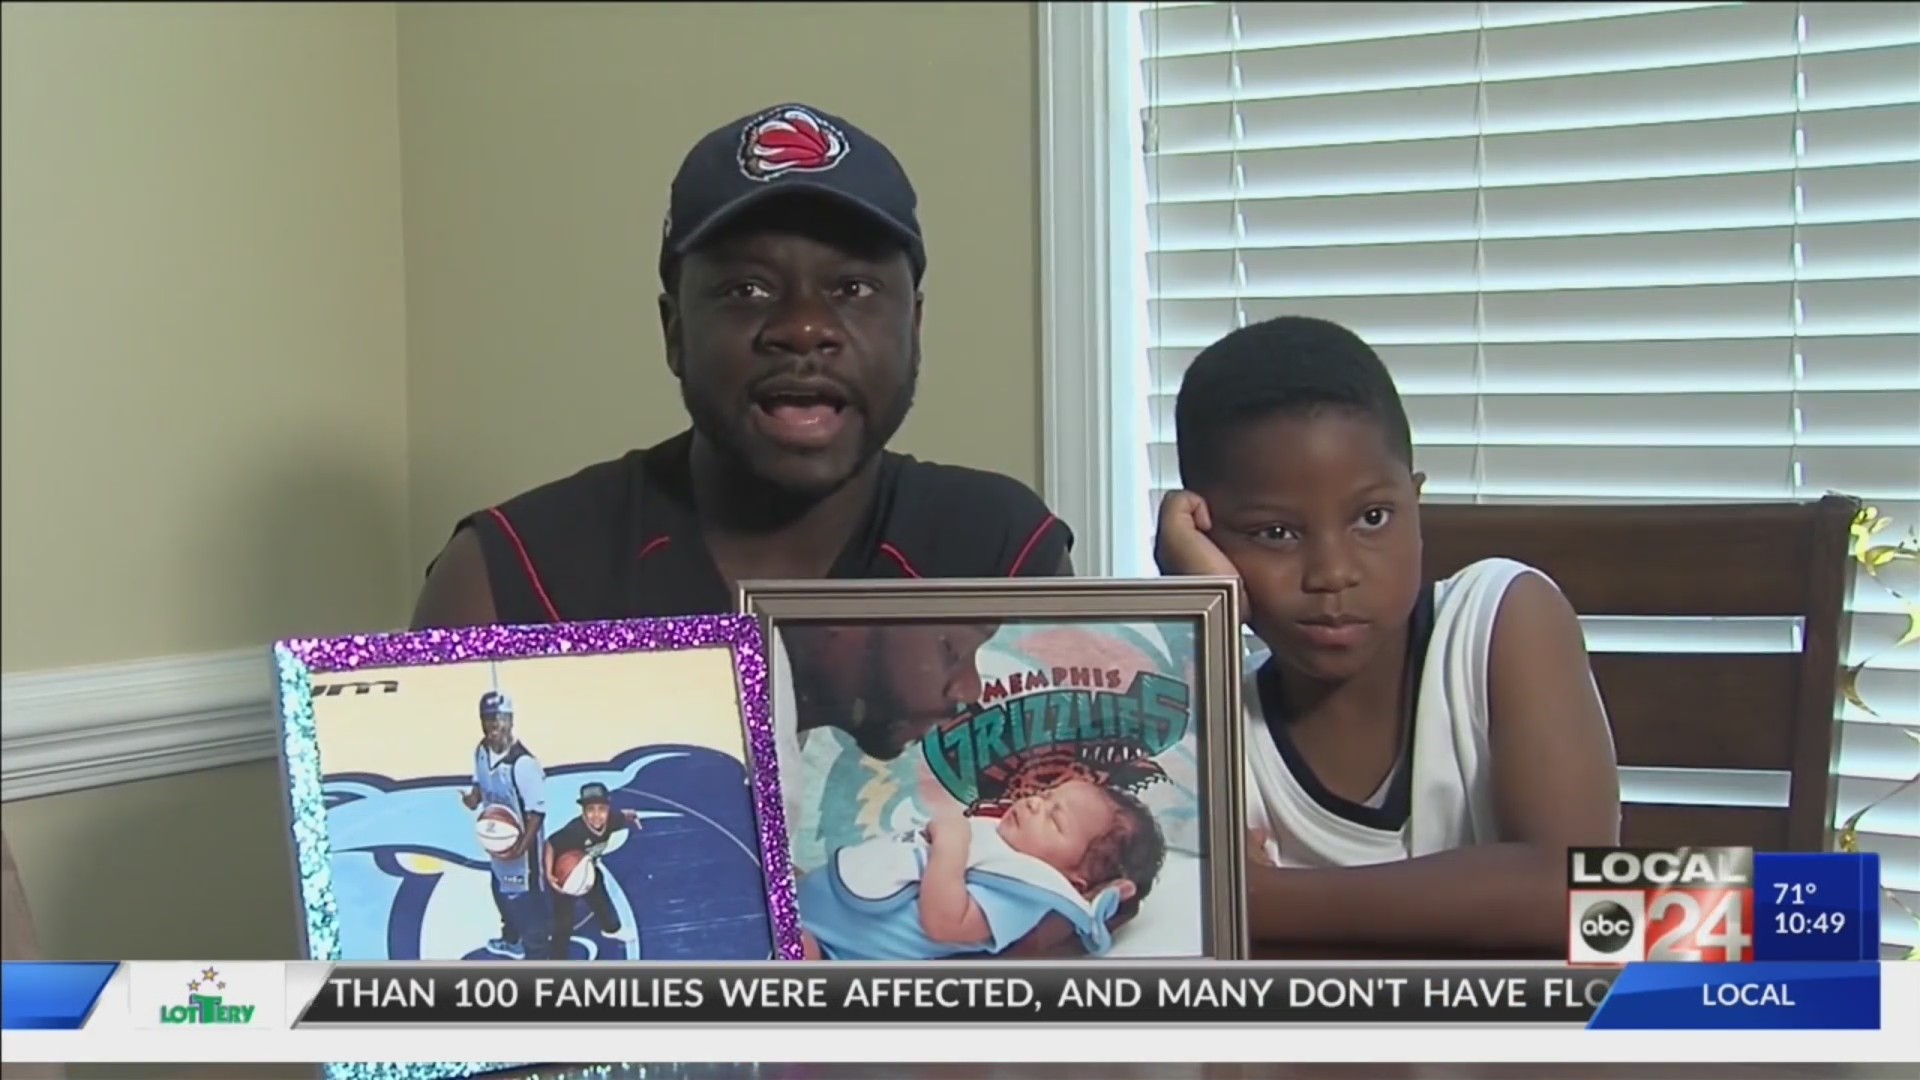 Meet a father & son duo who are Memphis Grizzlies super fans